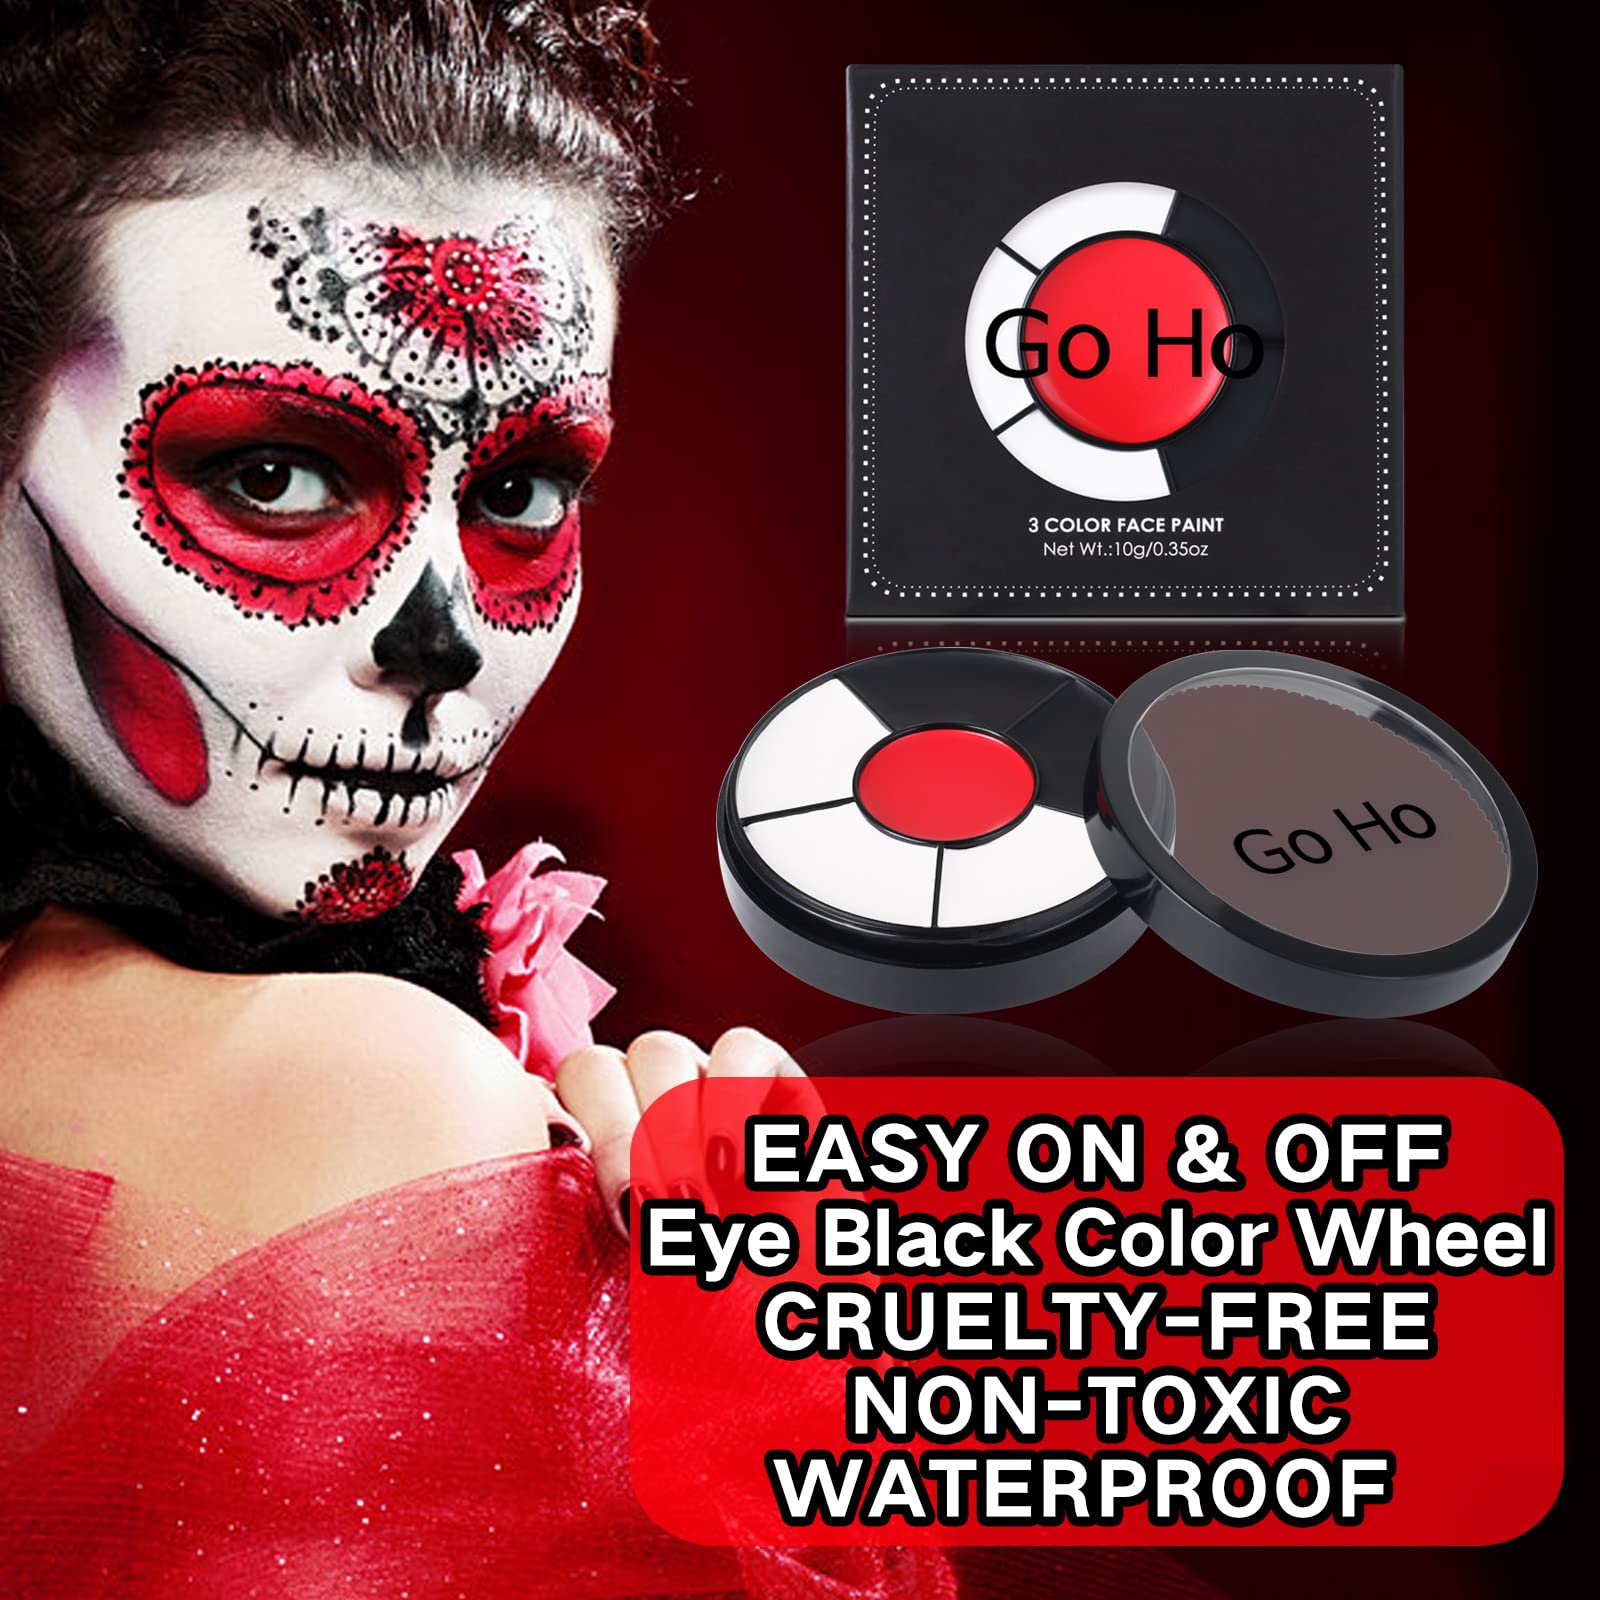 Go Ho Clown White Face Body Paint Makeup,Professional Red White Black Eye Black Football/Softball,Clown White Oil-based Face Paint for Halloween Cosplay FX Makeup,3 In 1 Face Painting for Clown Eyeblack Baseball Sports